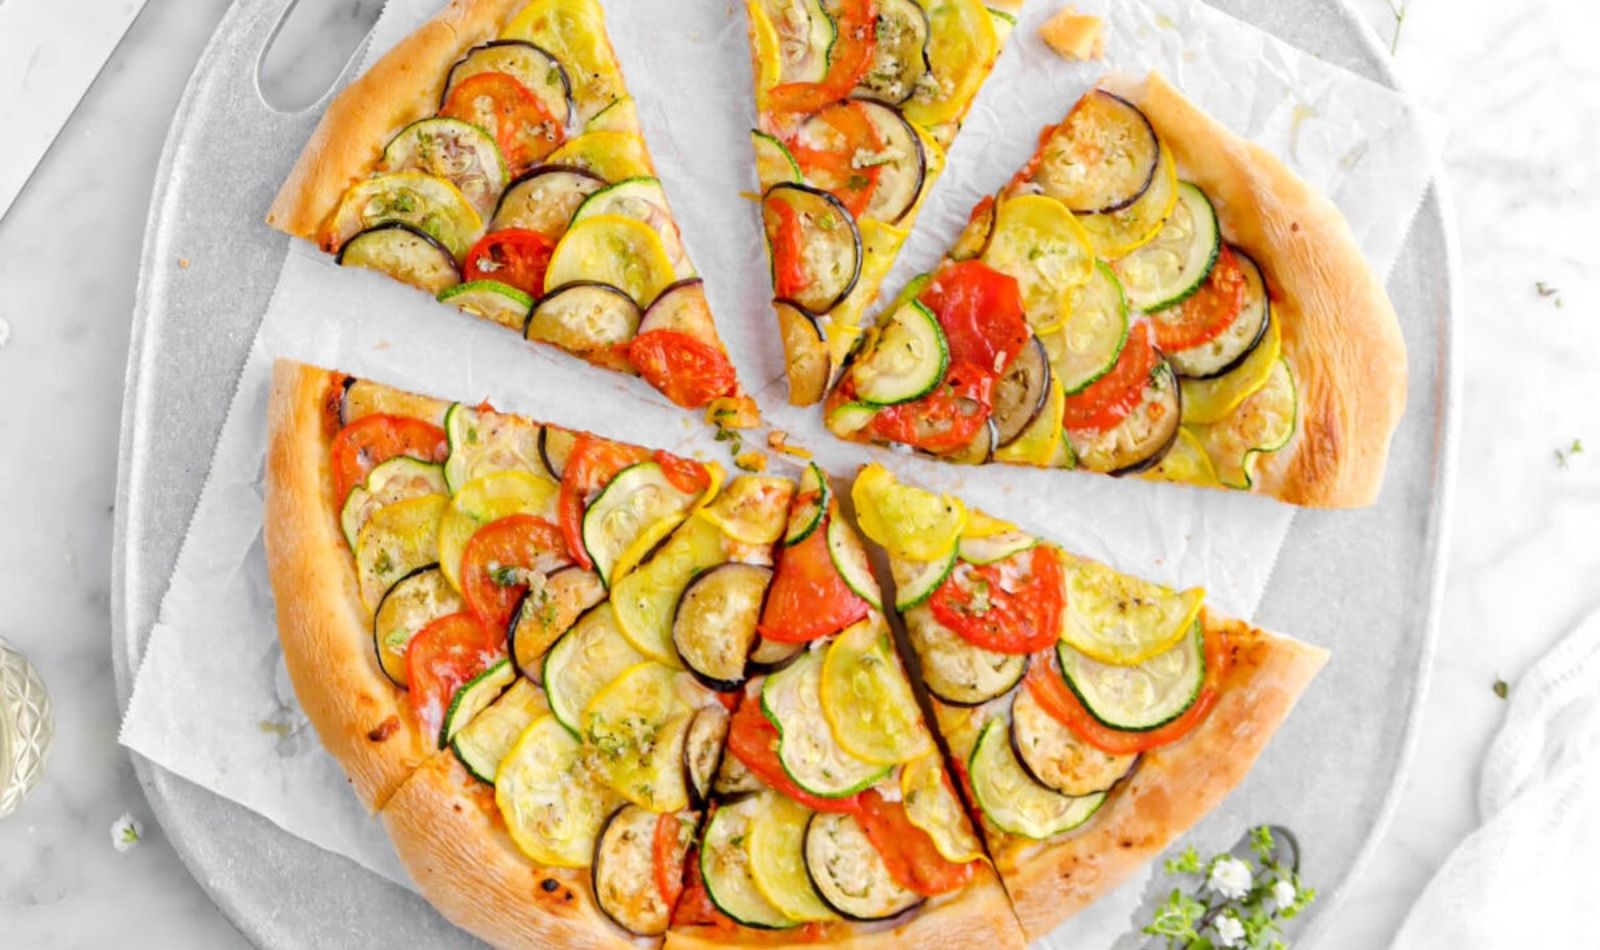 Image of a pizza on a white plate on a marble tabletop. Pizza has tomatoes summer squash and zucchini